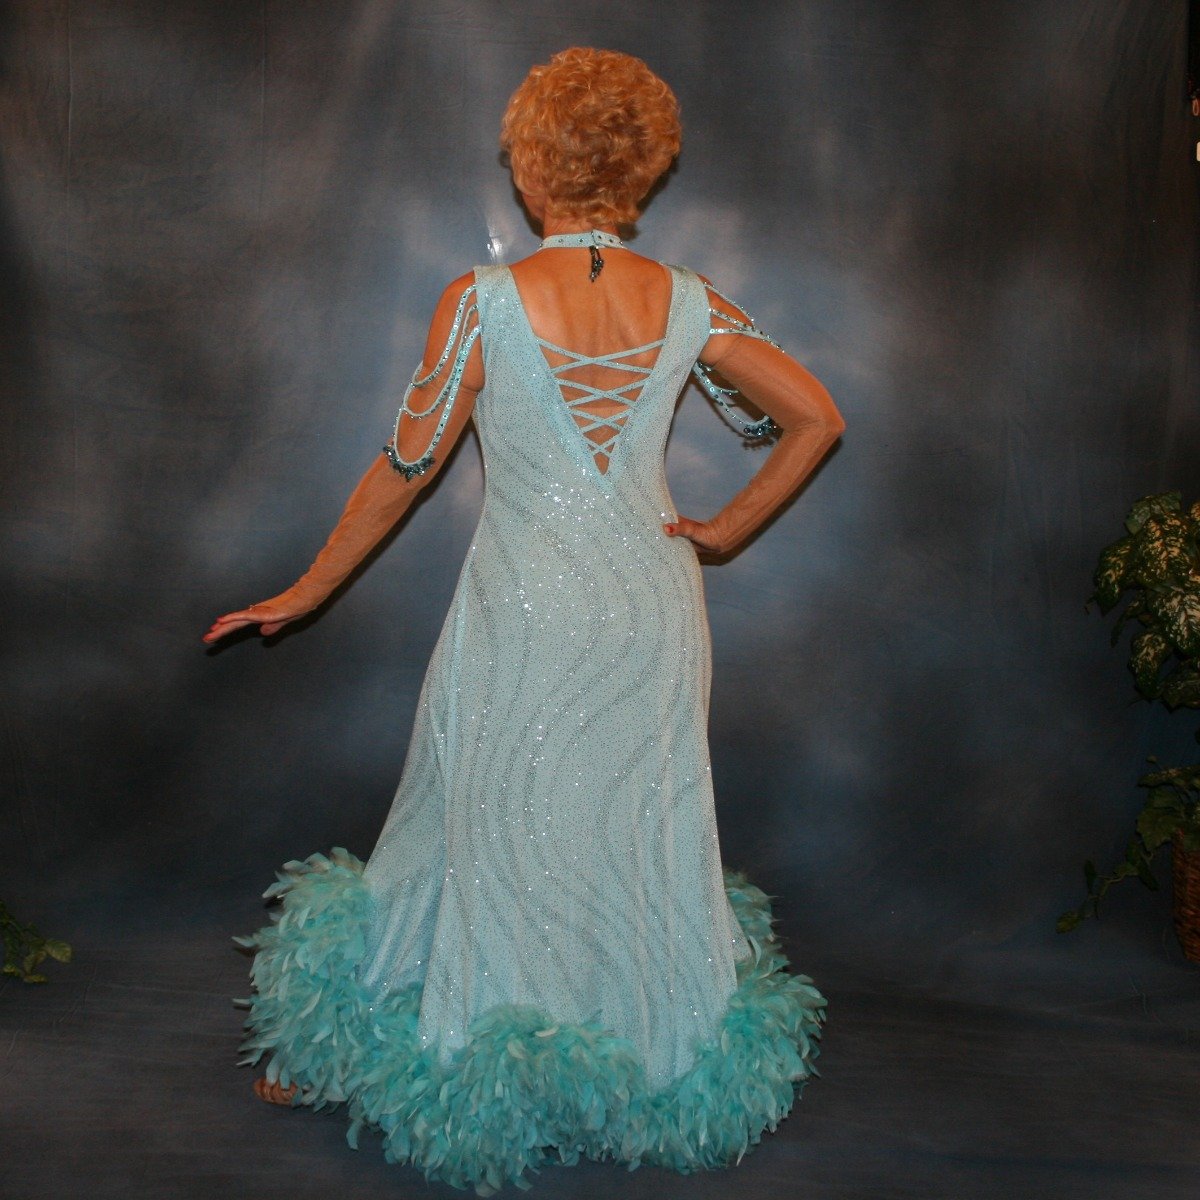 Crystal's Creations back view of Soft blue ballroom dress with chandelle feathers was created of a gorgeous glitter slinky with a wave pattern, has strap detailing on the low back, embellished with Swarovski rhinestones & hand beading on the arm draping straps & matching neck piece.